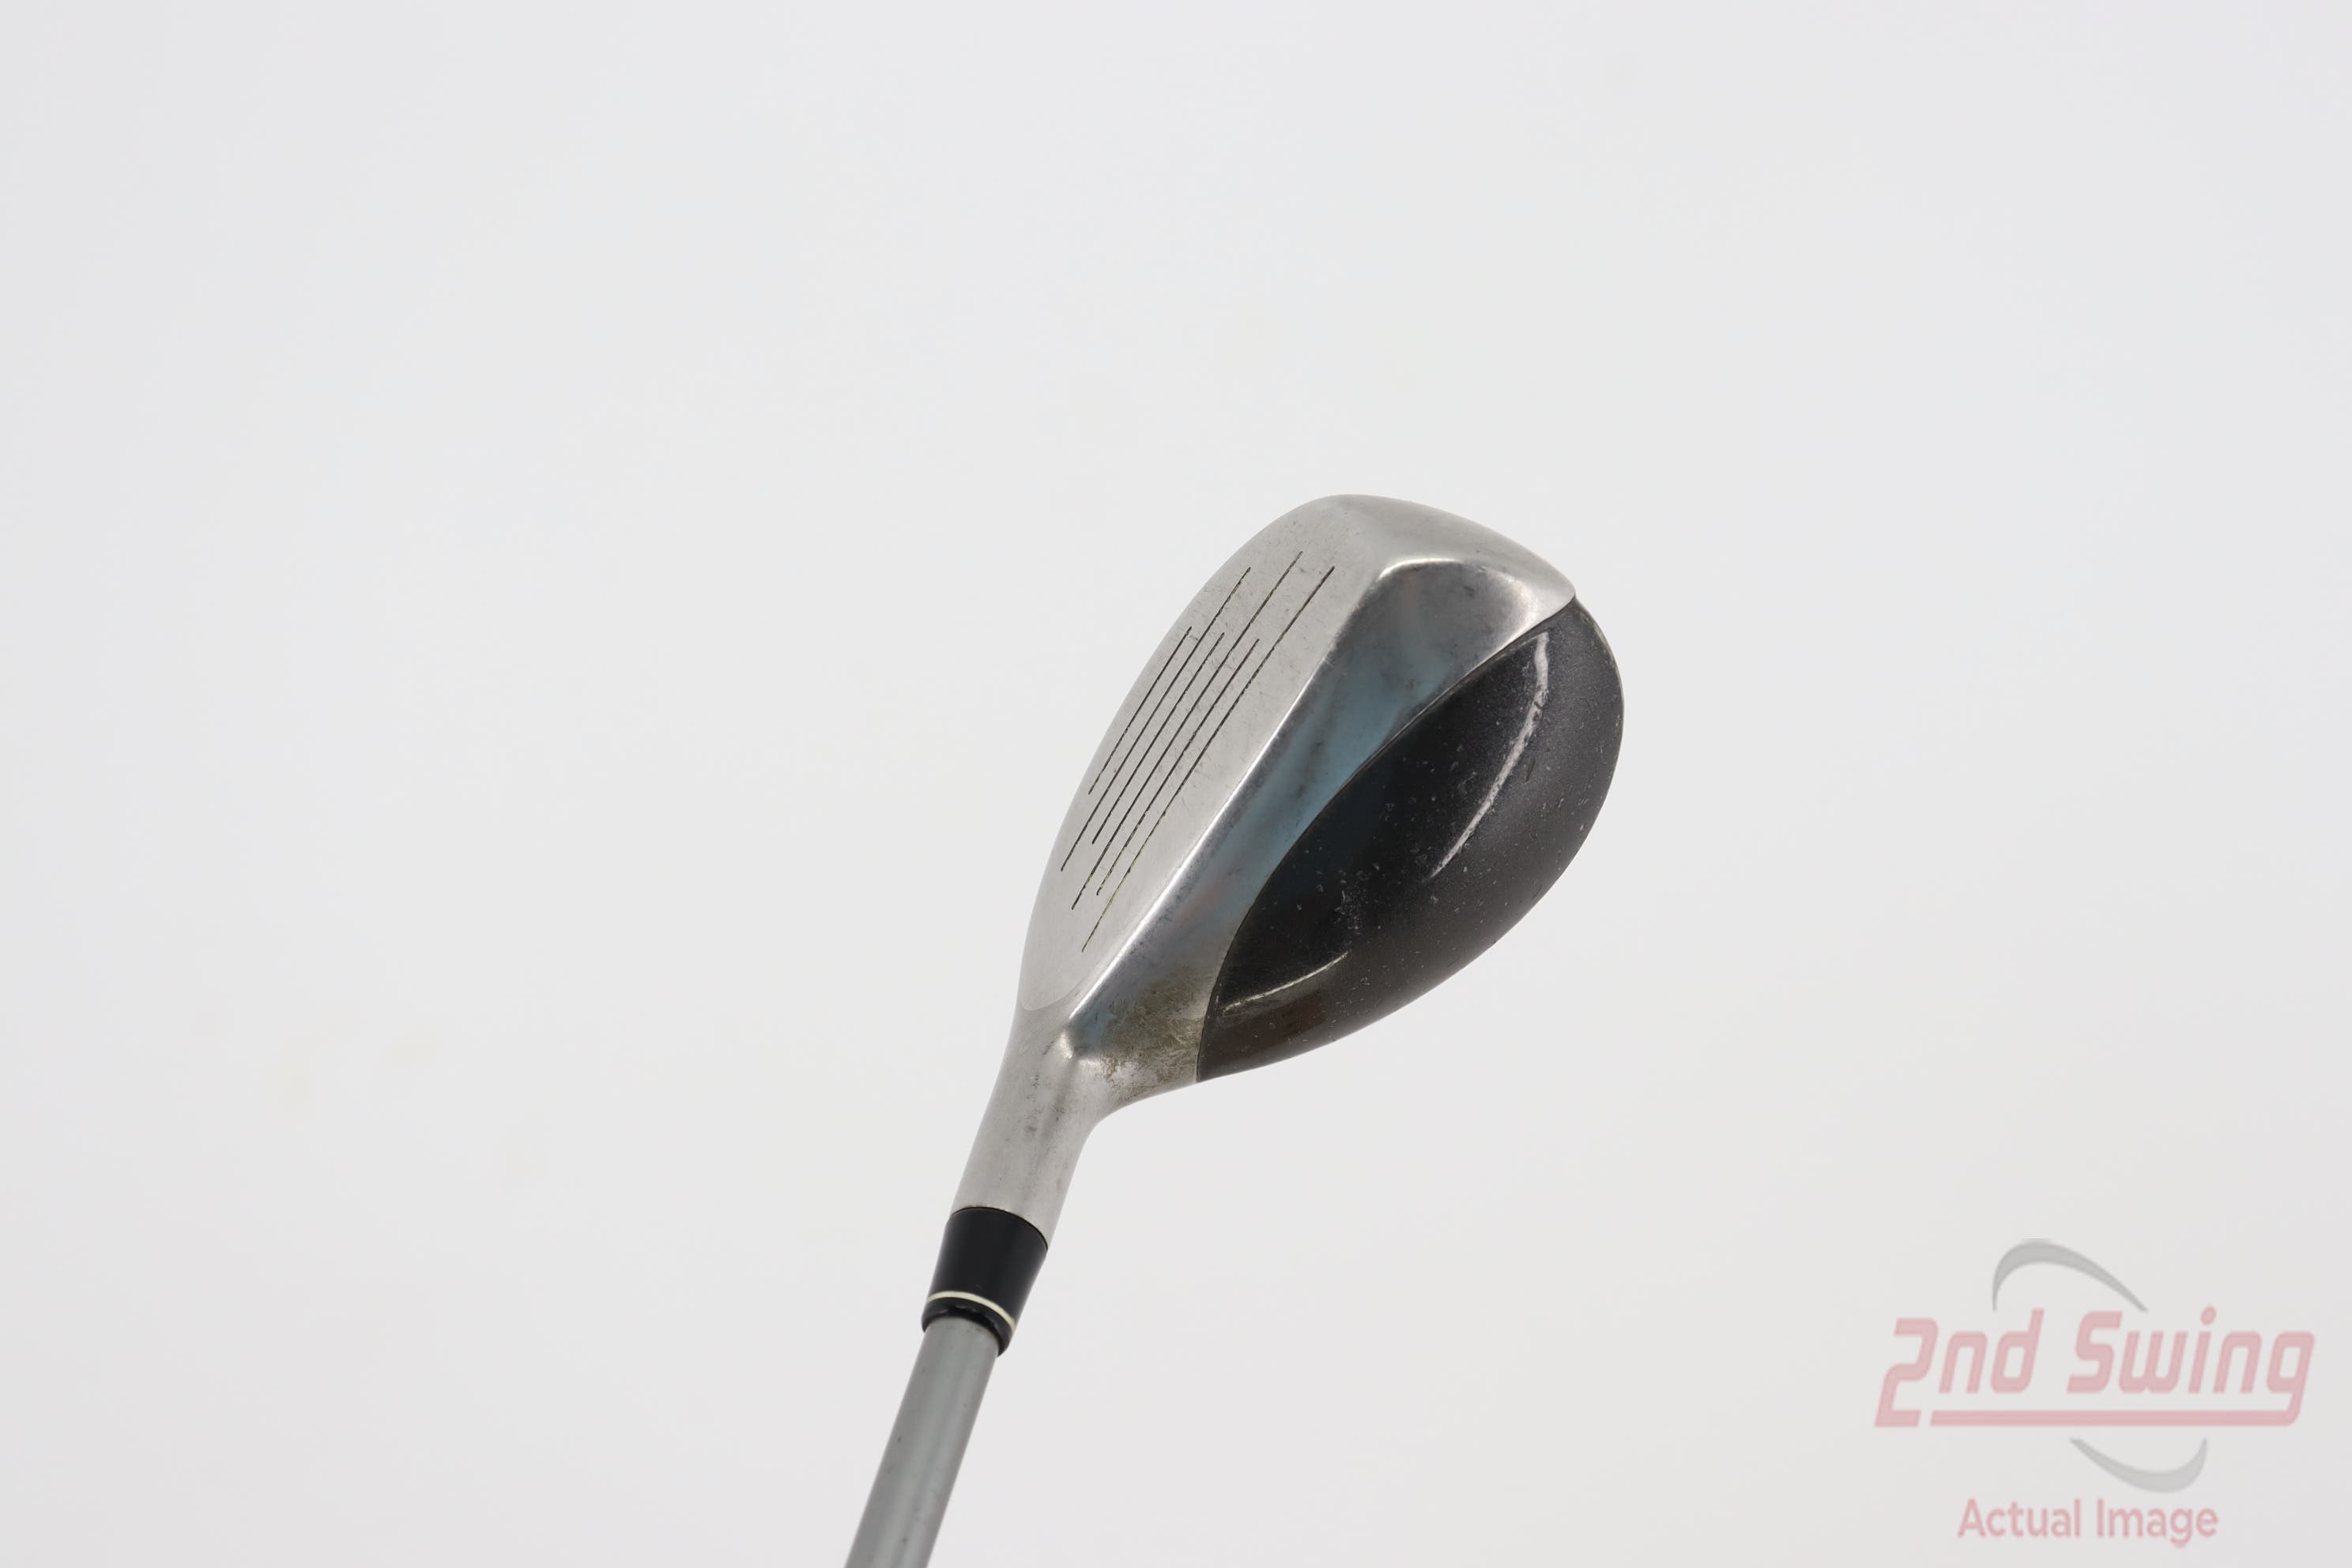 TaylorMade Rescue Dual Hybrid | 2nd Swing Golf